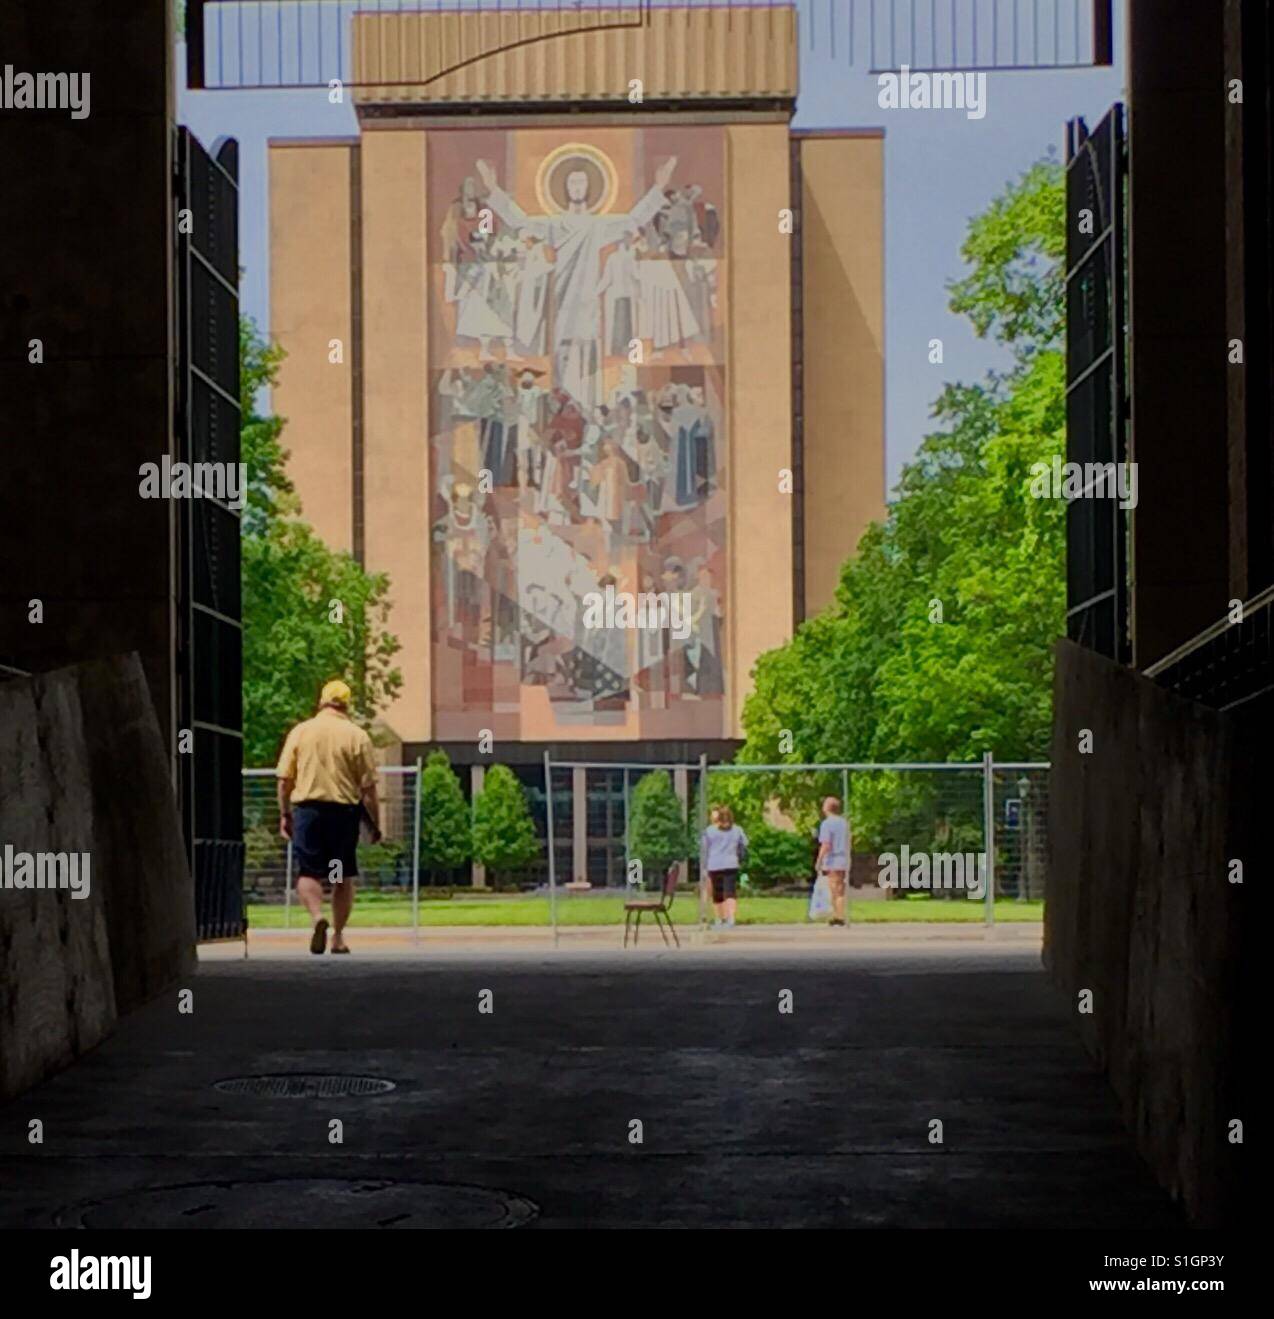 'Touch Down Jesus', 'Word of Life' Mural as seen from inside the stadium gate where the team exits,  the University of Notre Dame, Notre Dame, Indiana Stock Photo